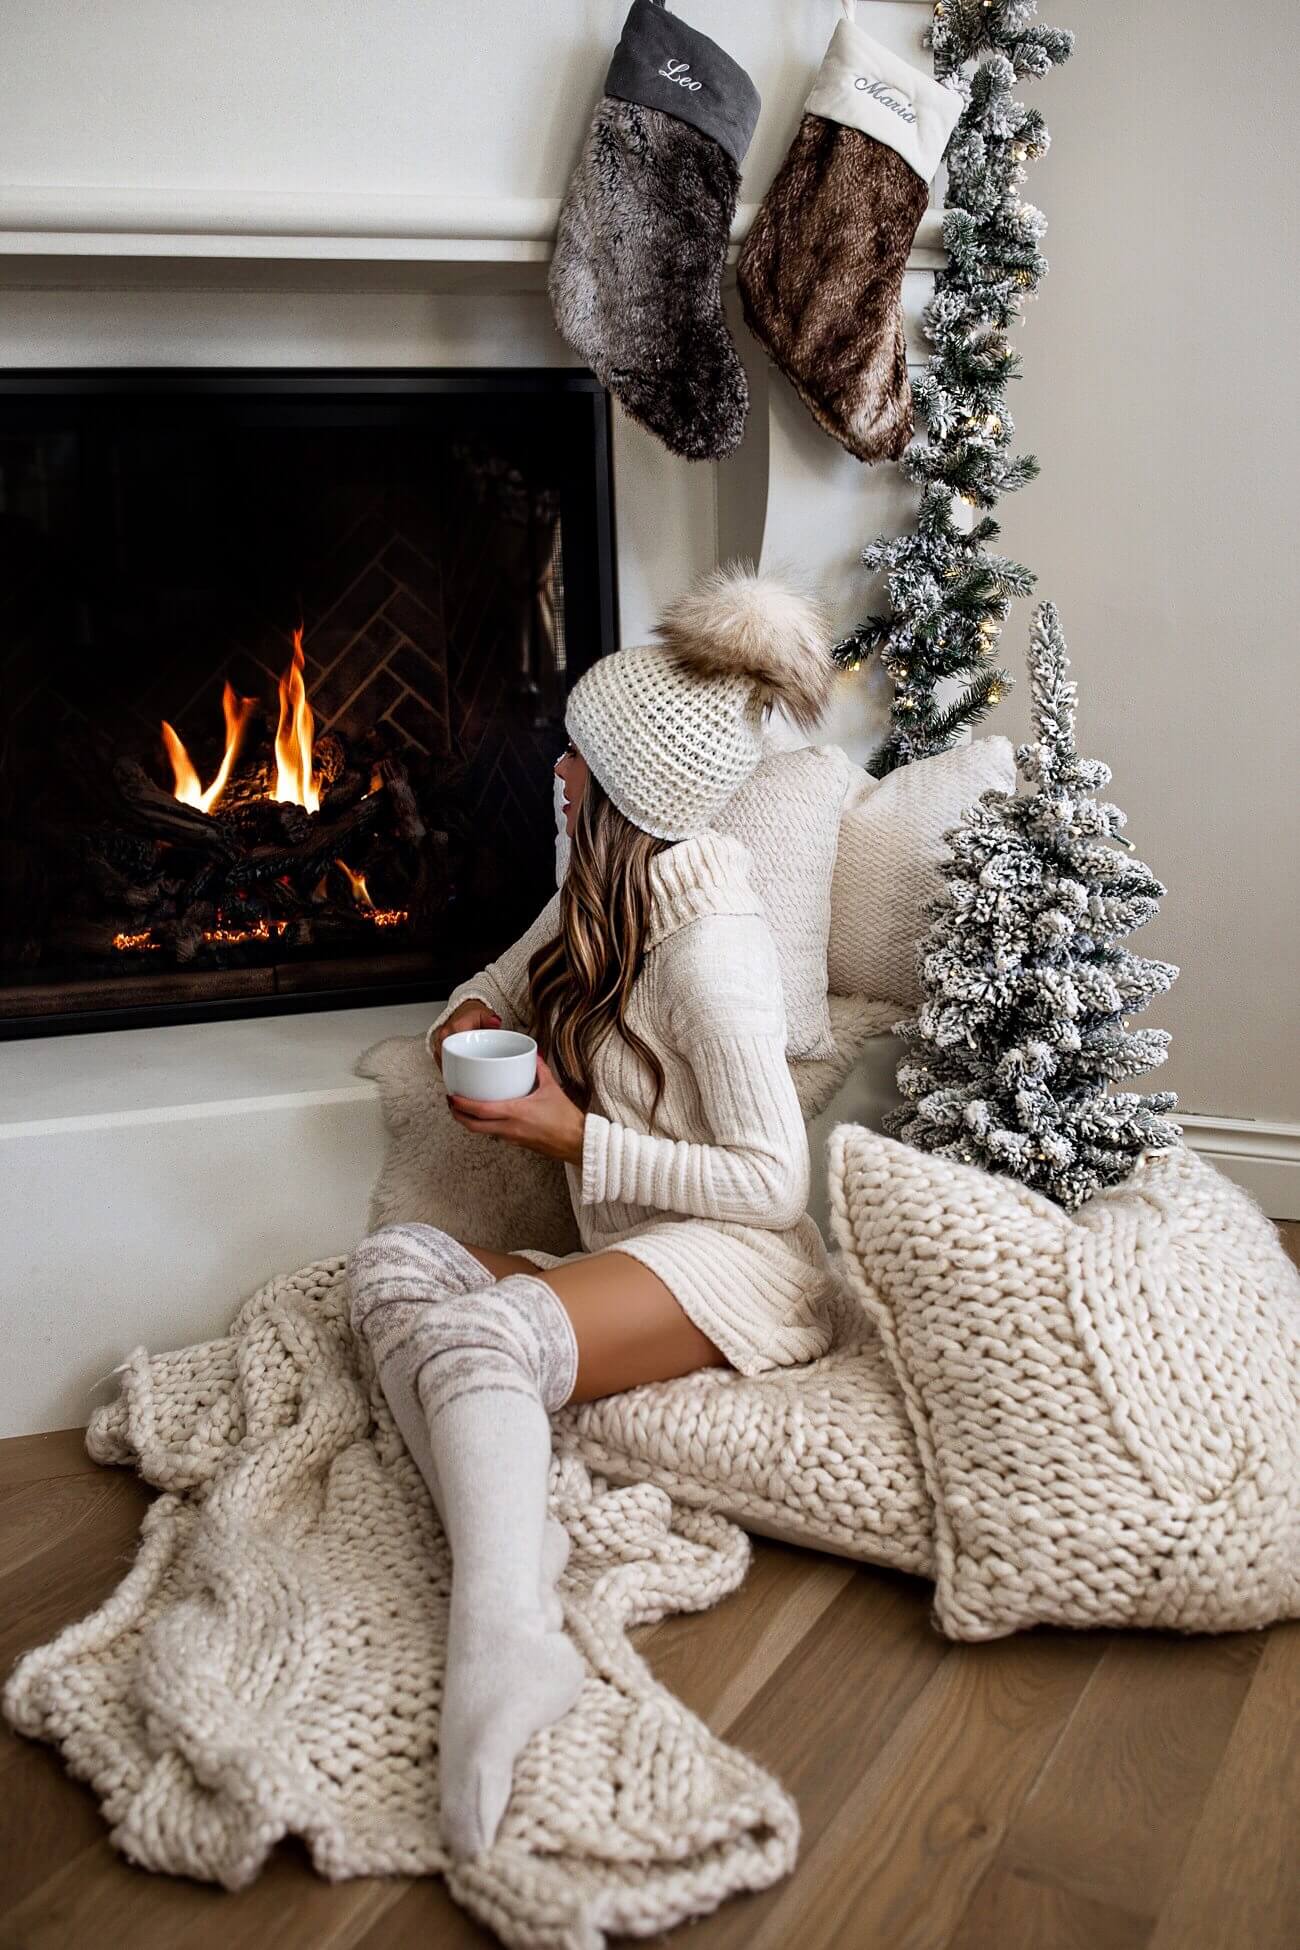 fashion blogger mia mia mine wearing a white bcbgeneration sweater at home by fireplace